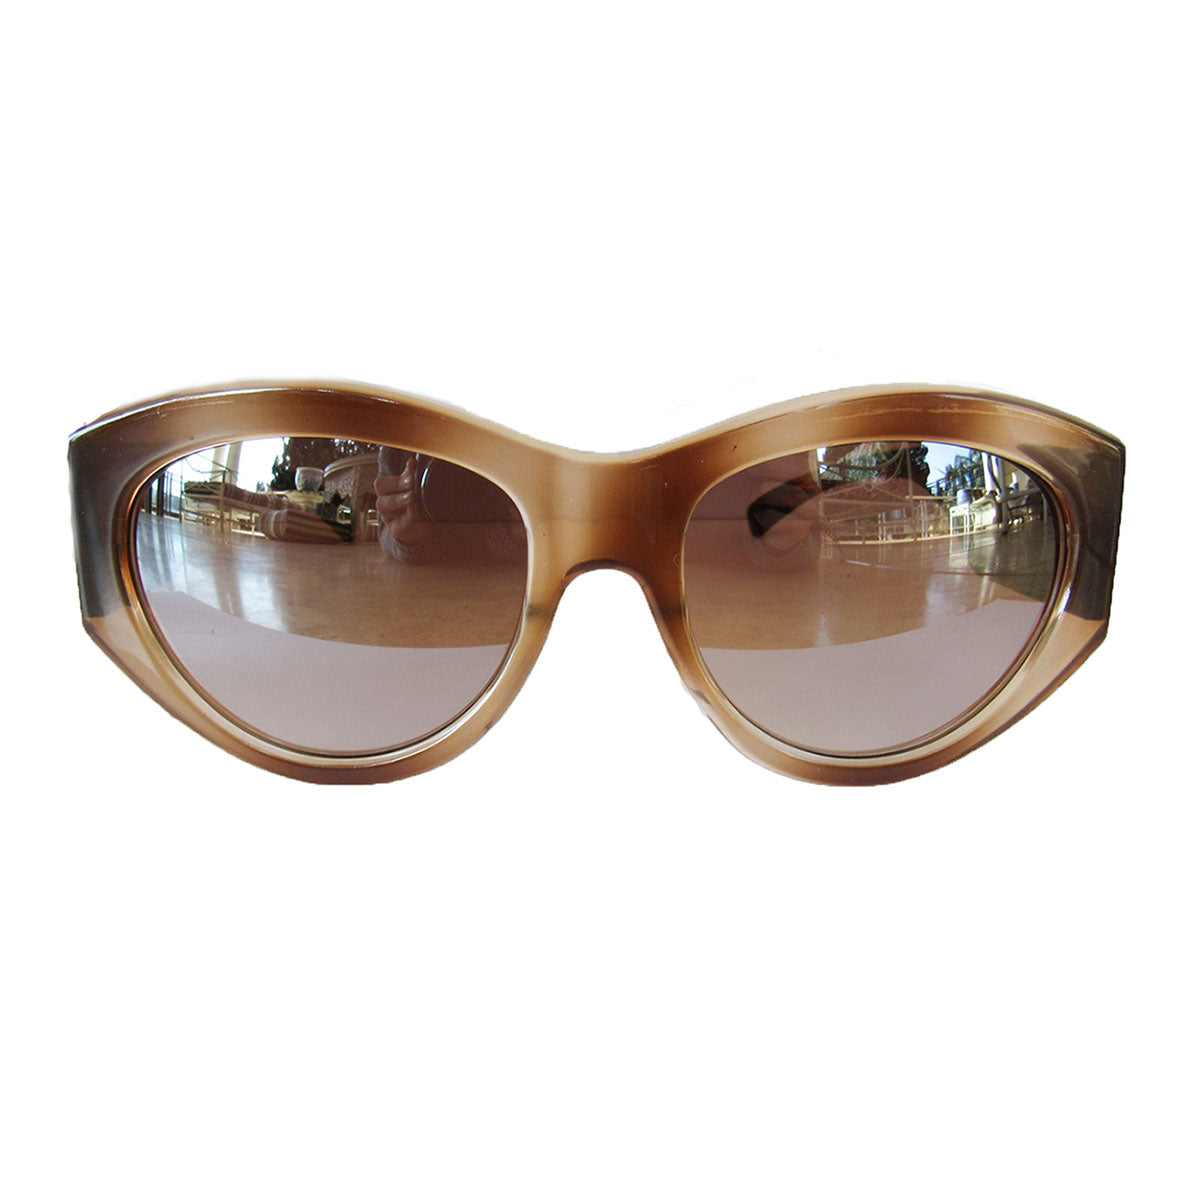 Mask Style Honey Coloured Sunglasses w/ Wooden Pattern Arms and Silver Mirrored Lenses